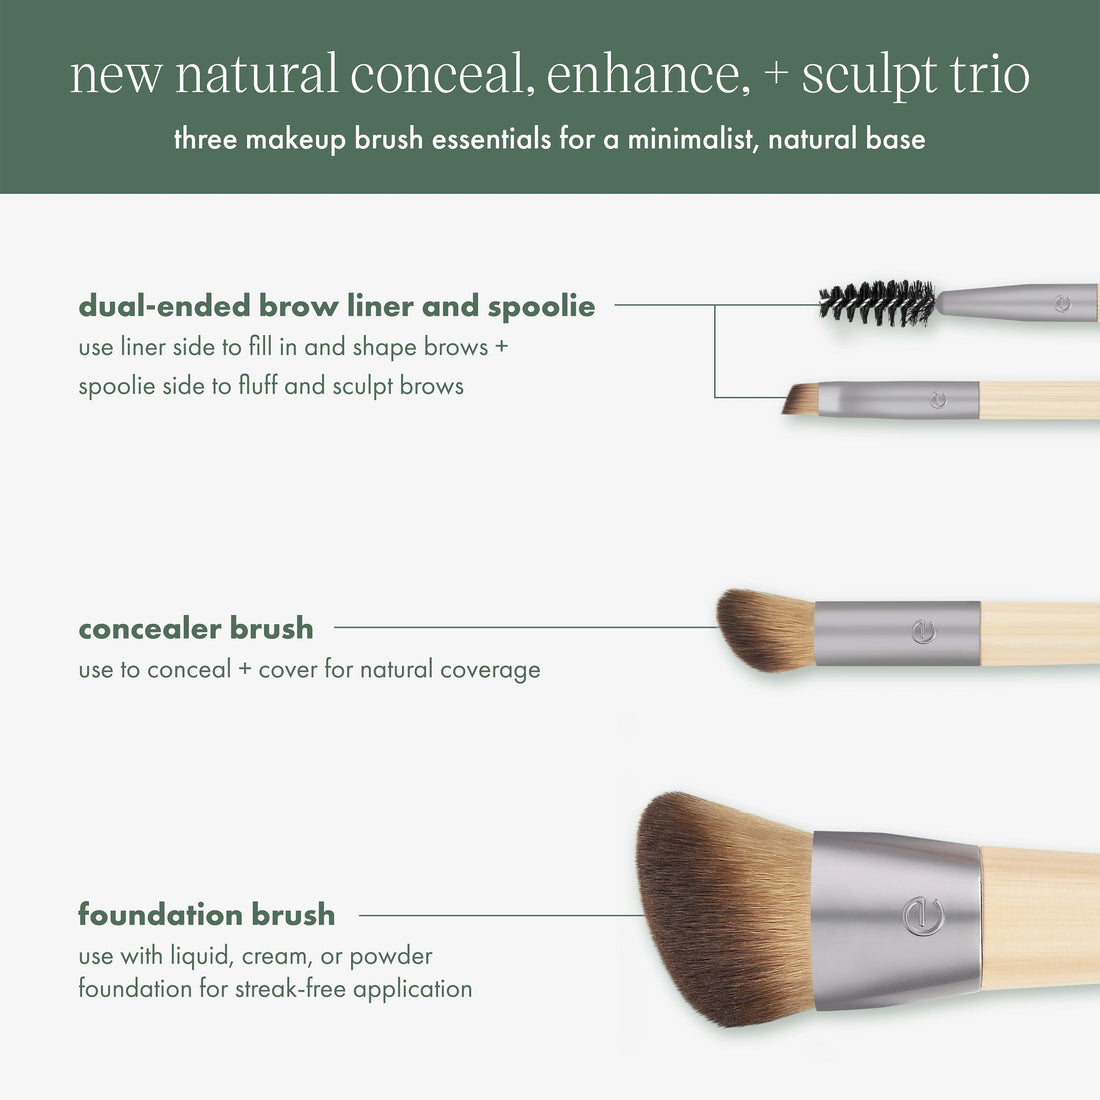  Real Techniques Eye Shade & Blend Makeup Brush Trio, For  Eyeshadow & Liner, Makeup Tools for Shaping & Grooming Brows, Defined  Makeup Look, Synthetic Bristles, Vegan & Cruelty-Free, 3 Count 